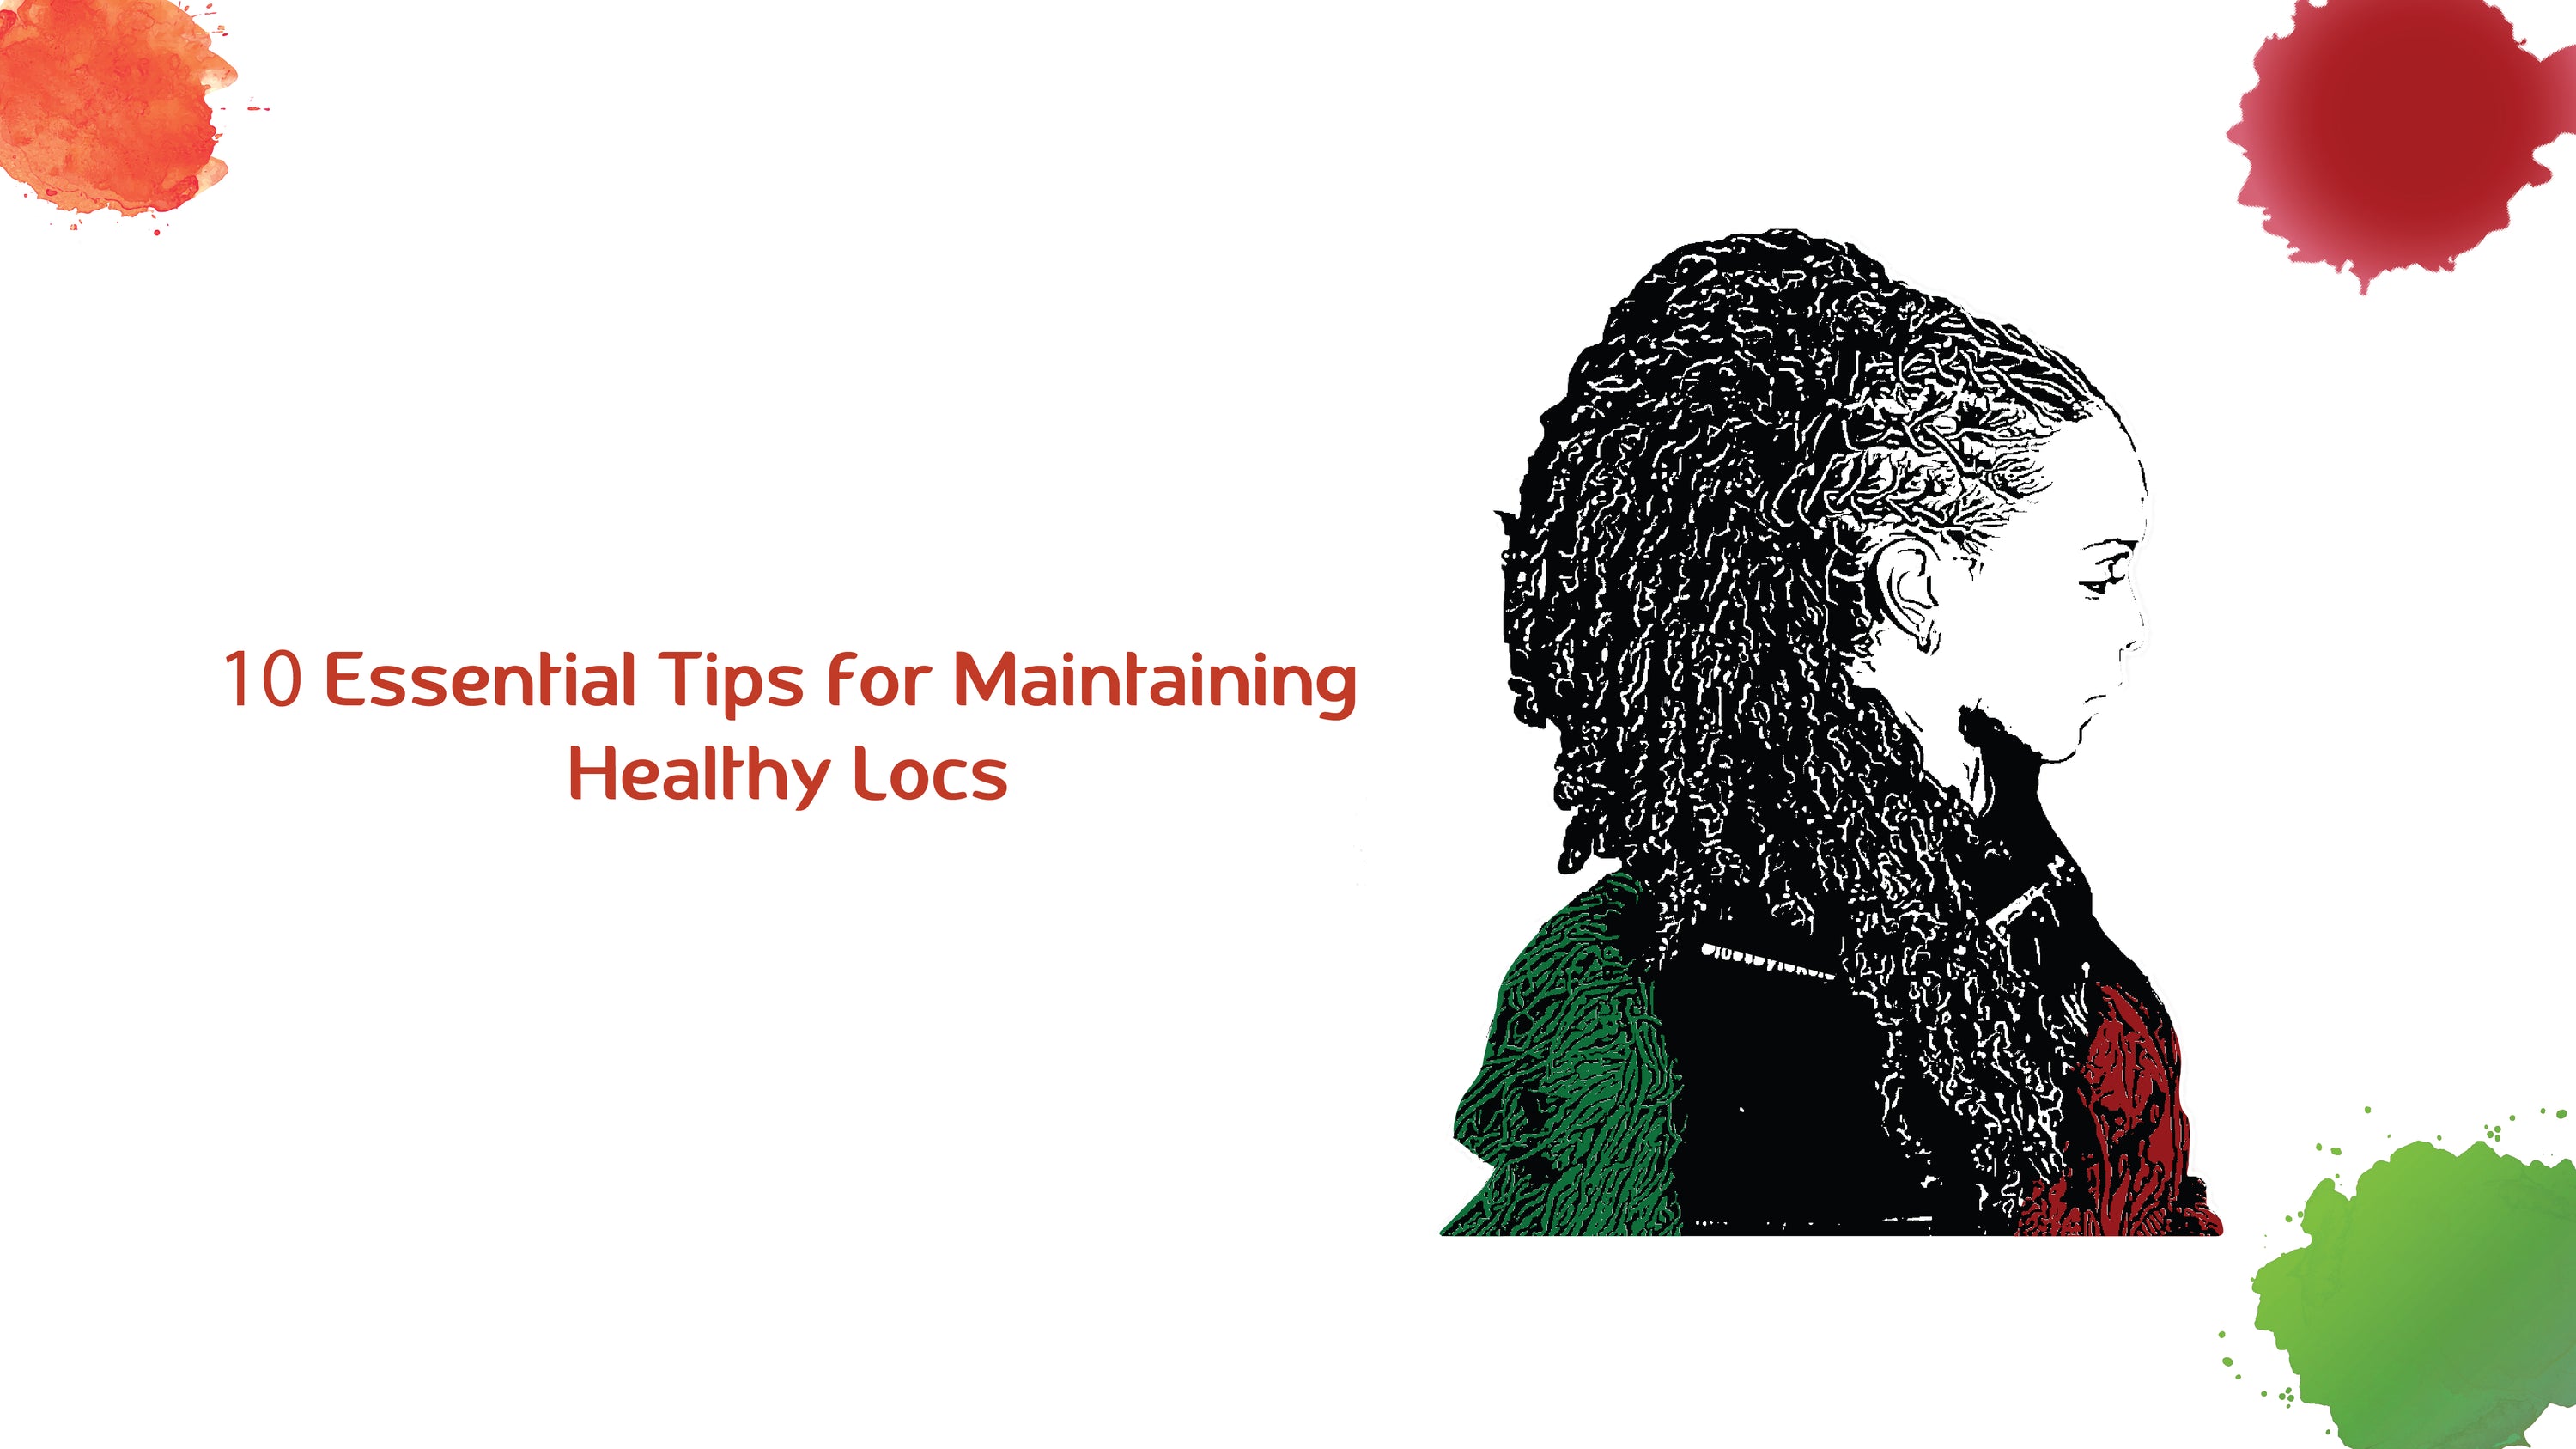 10 Essential Tips For Maintaining Healthy Locs